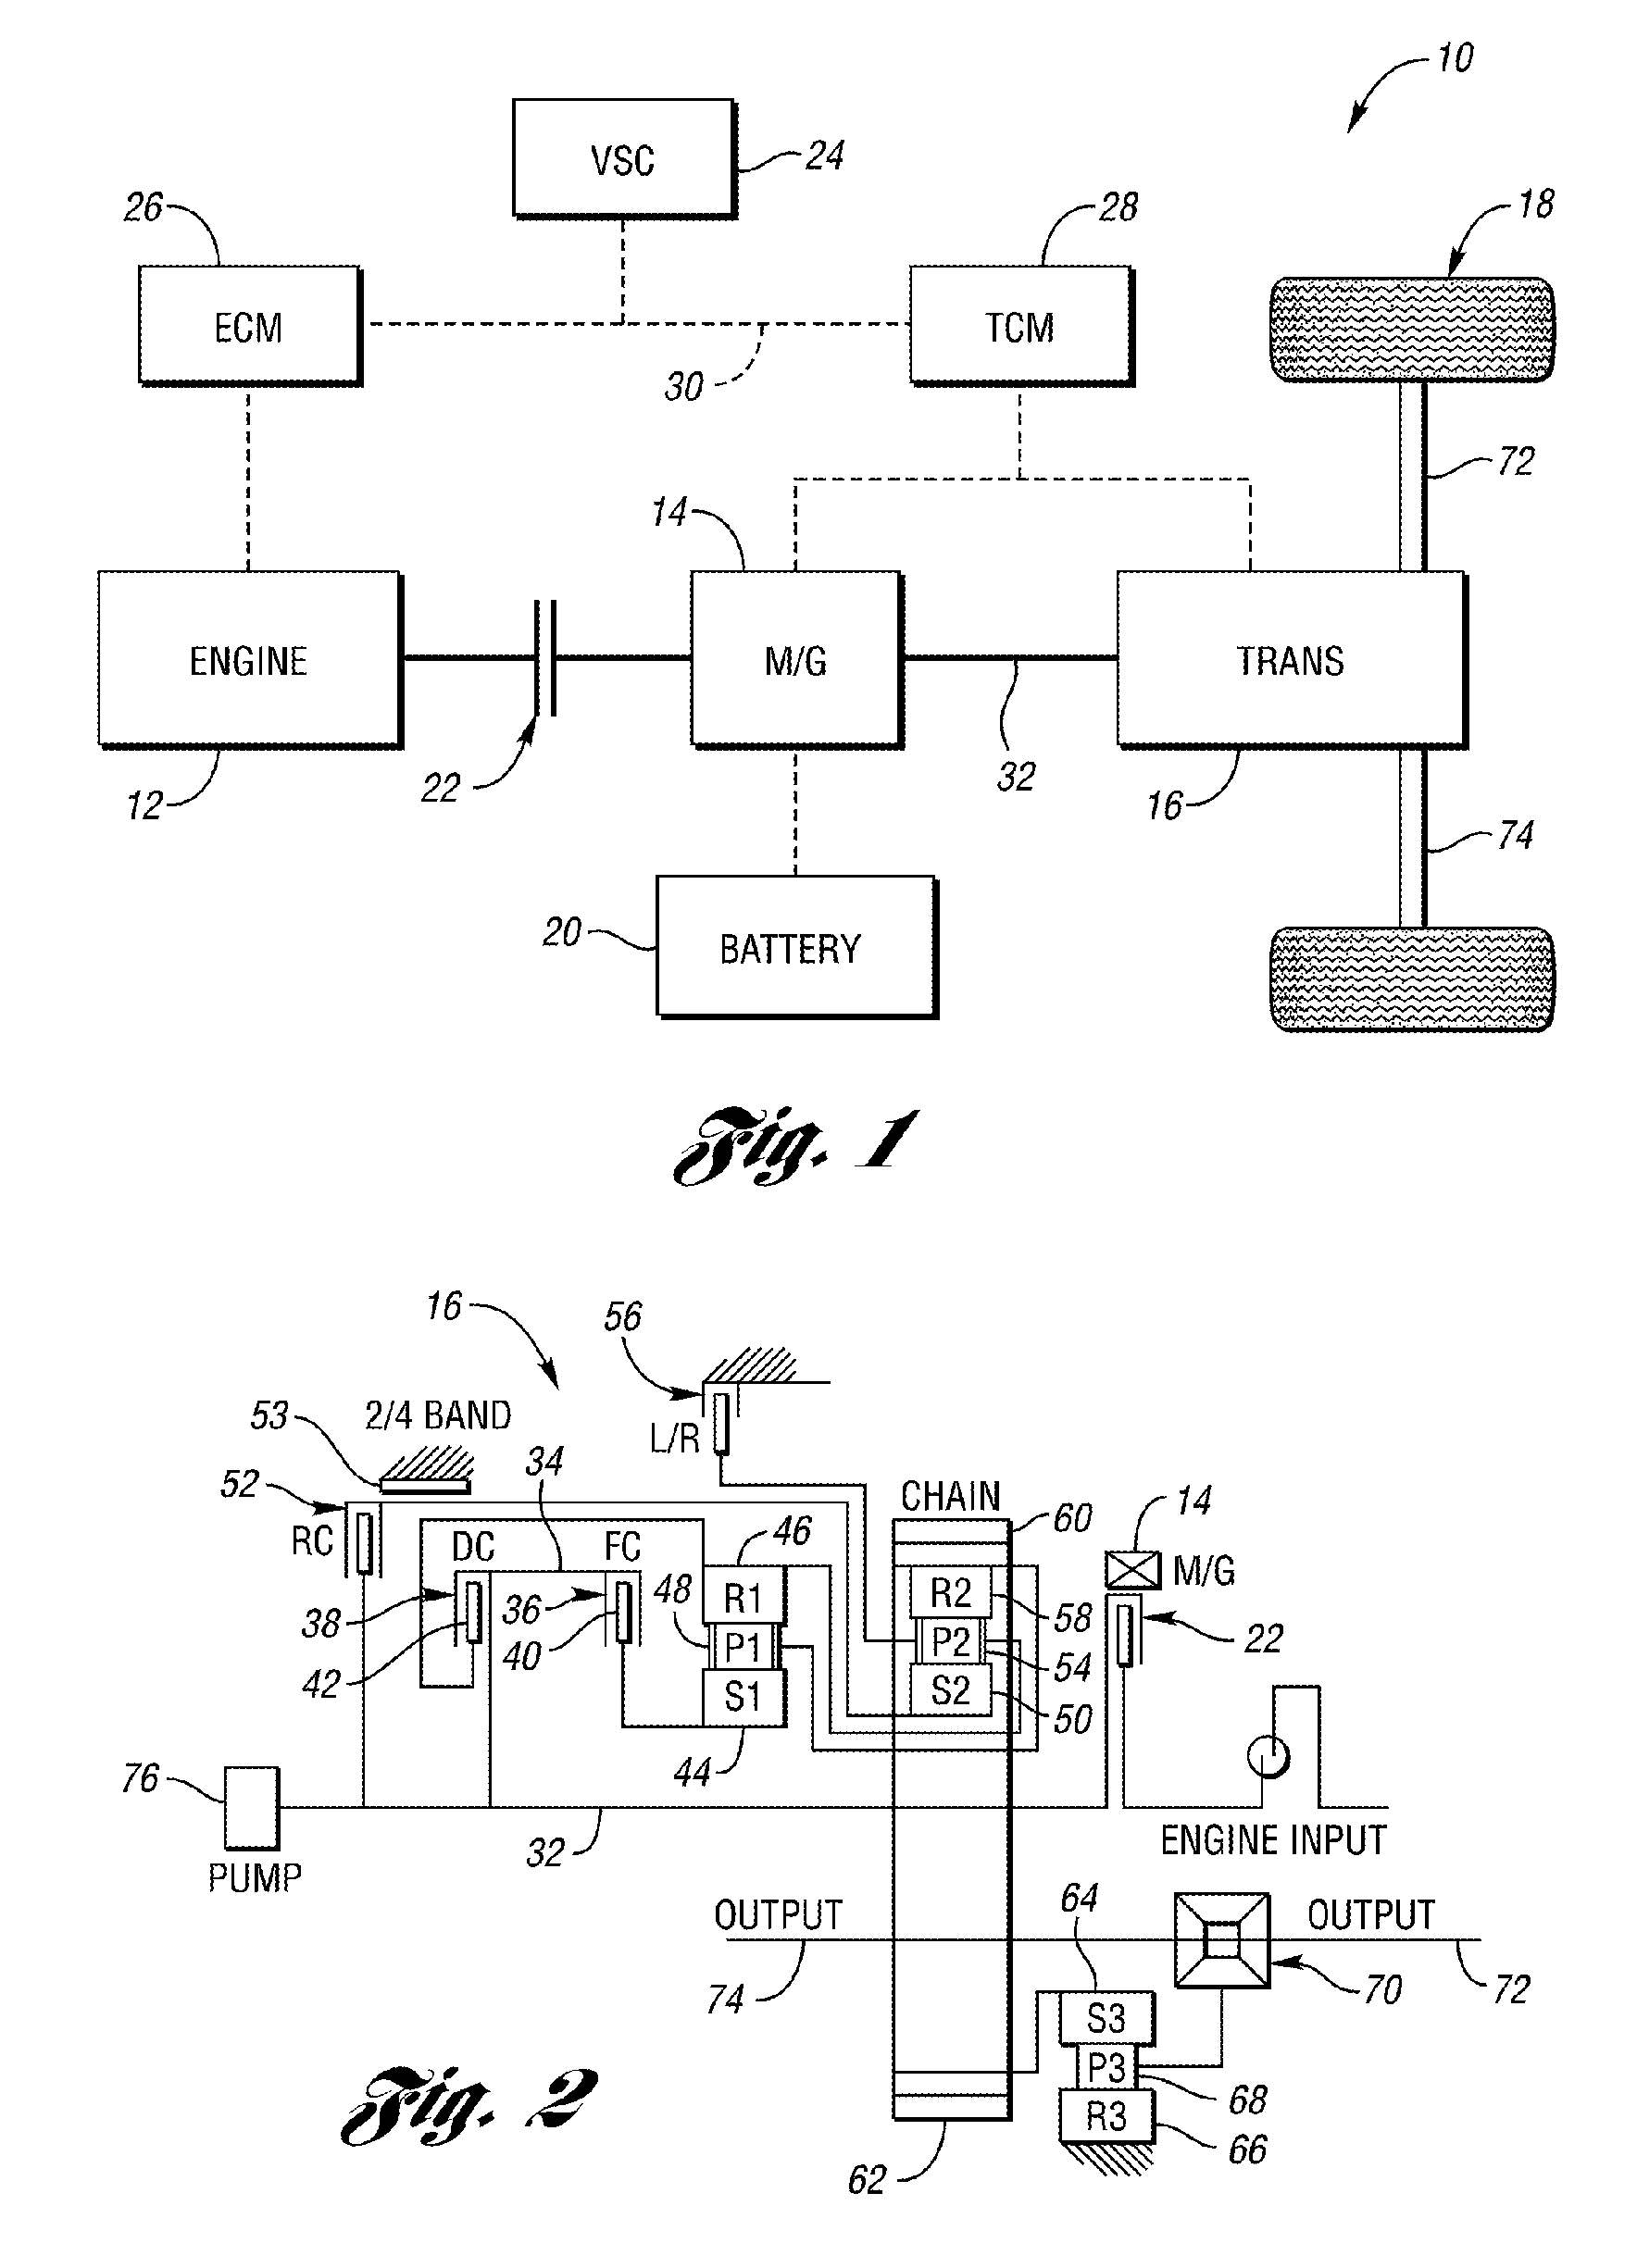 Vehicle and method for controlling engine start in a vehicle